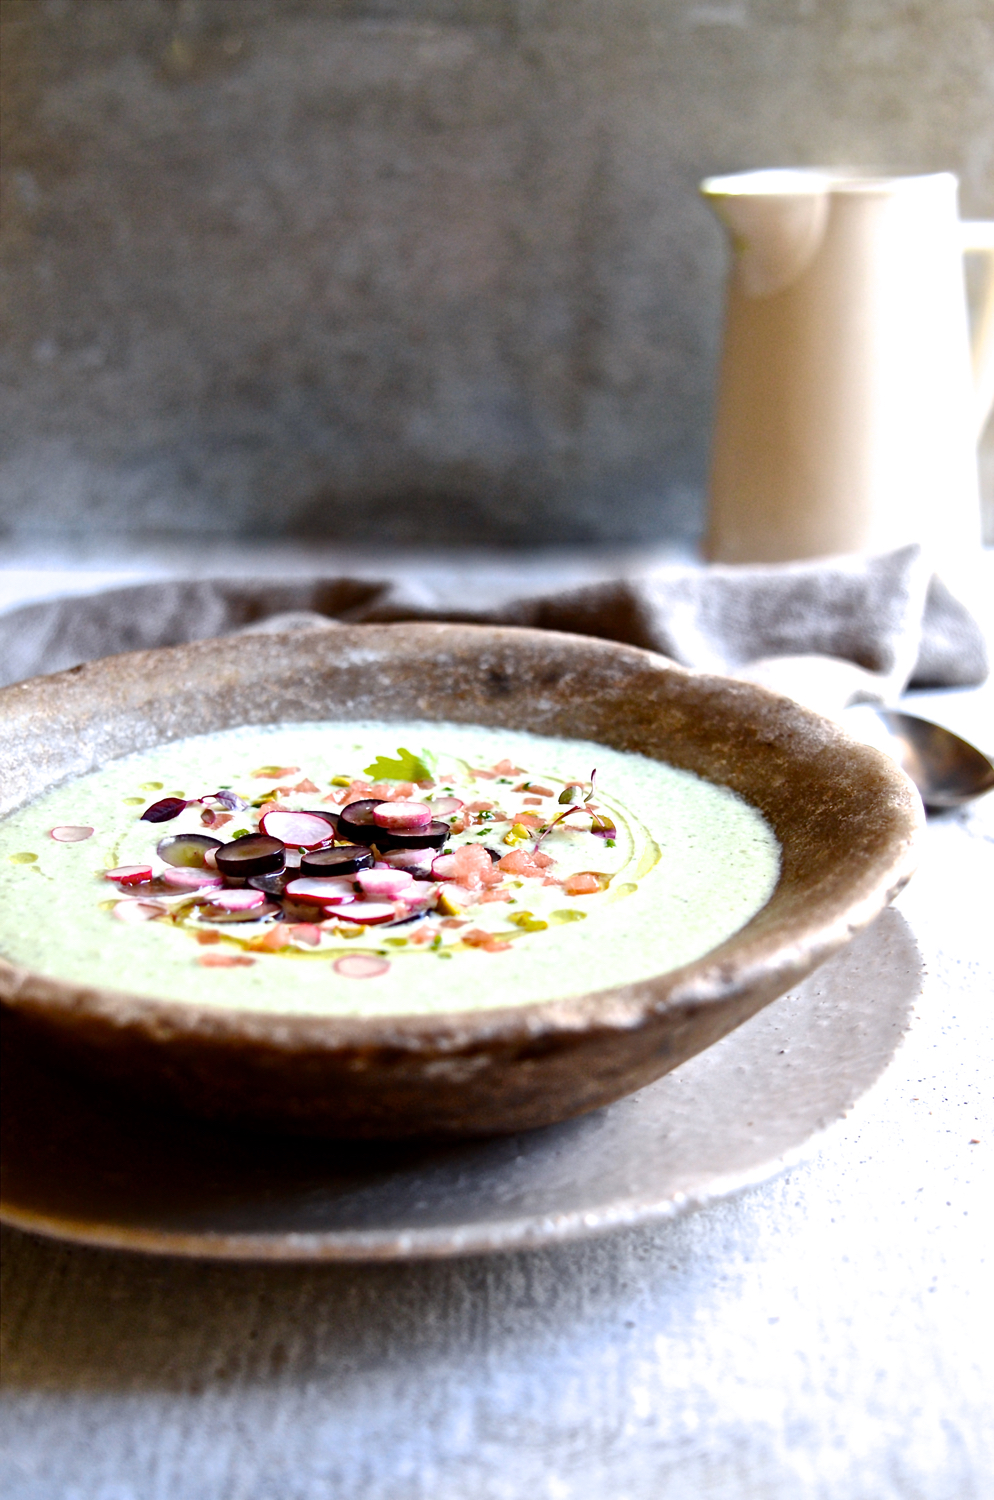 Chilled cucumber soup with grape salsa